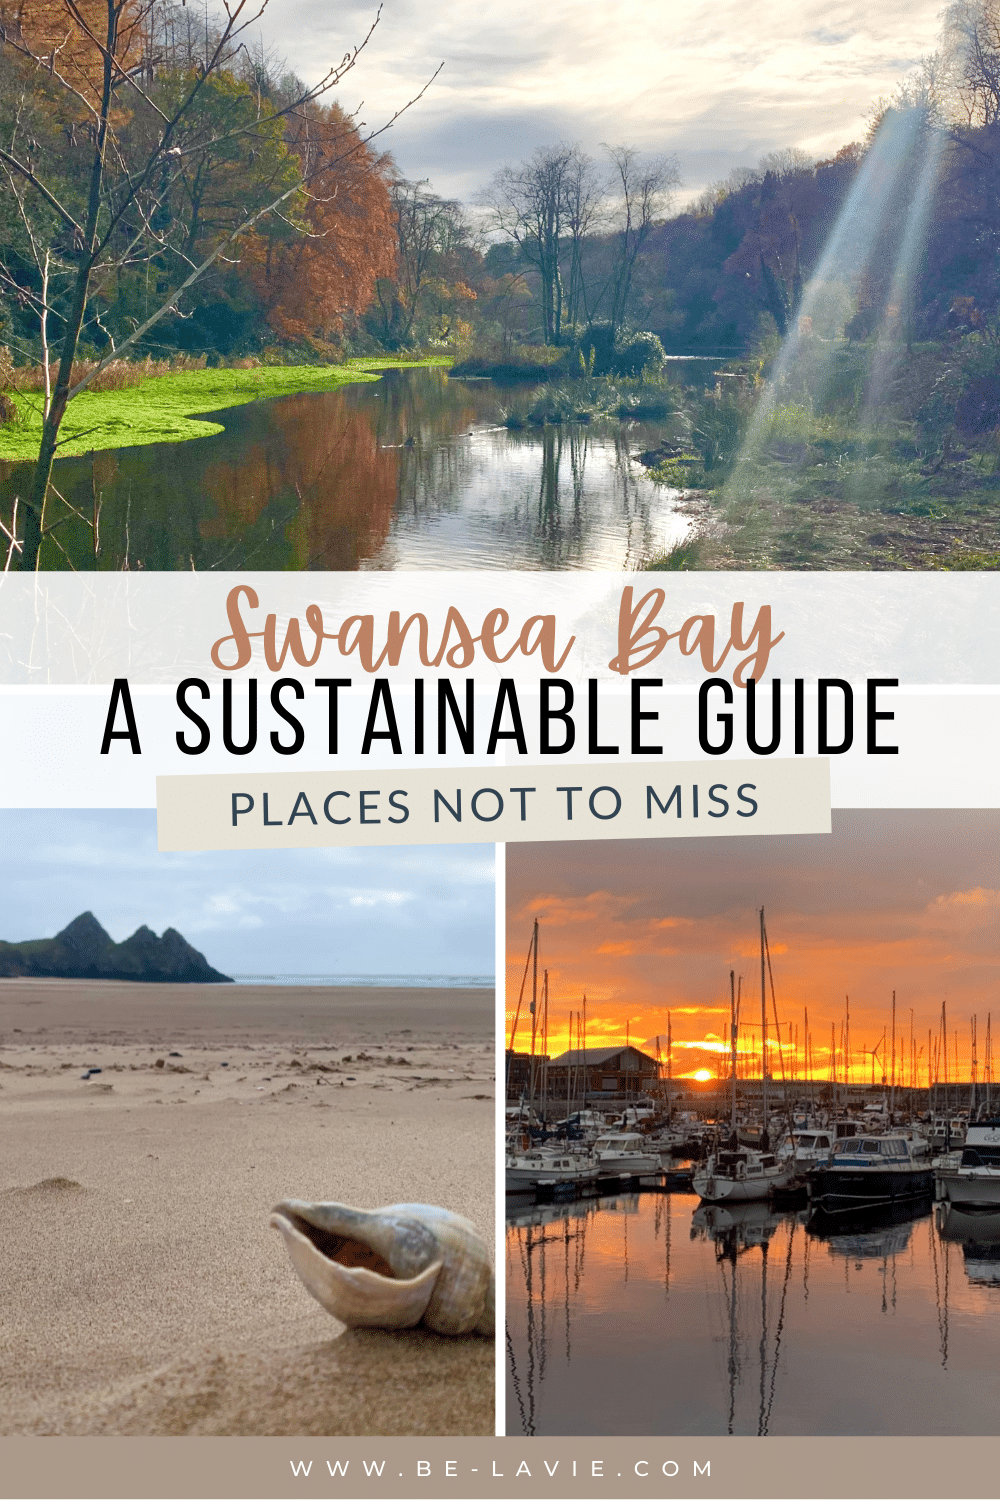 A sustainable guide to Swansea Bay Pinterest Pin